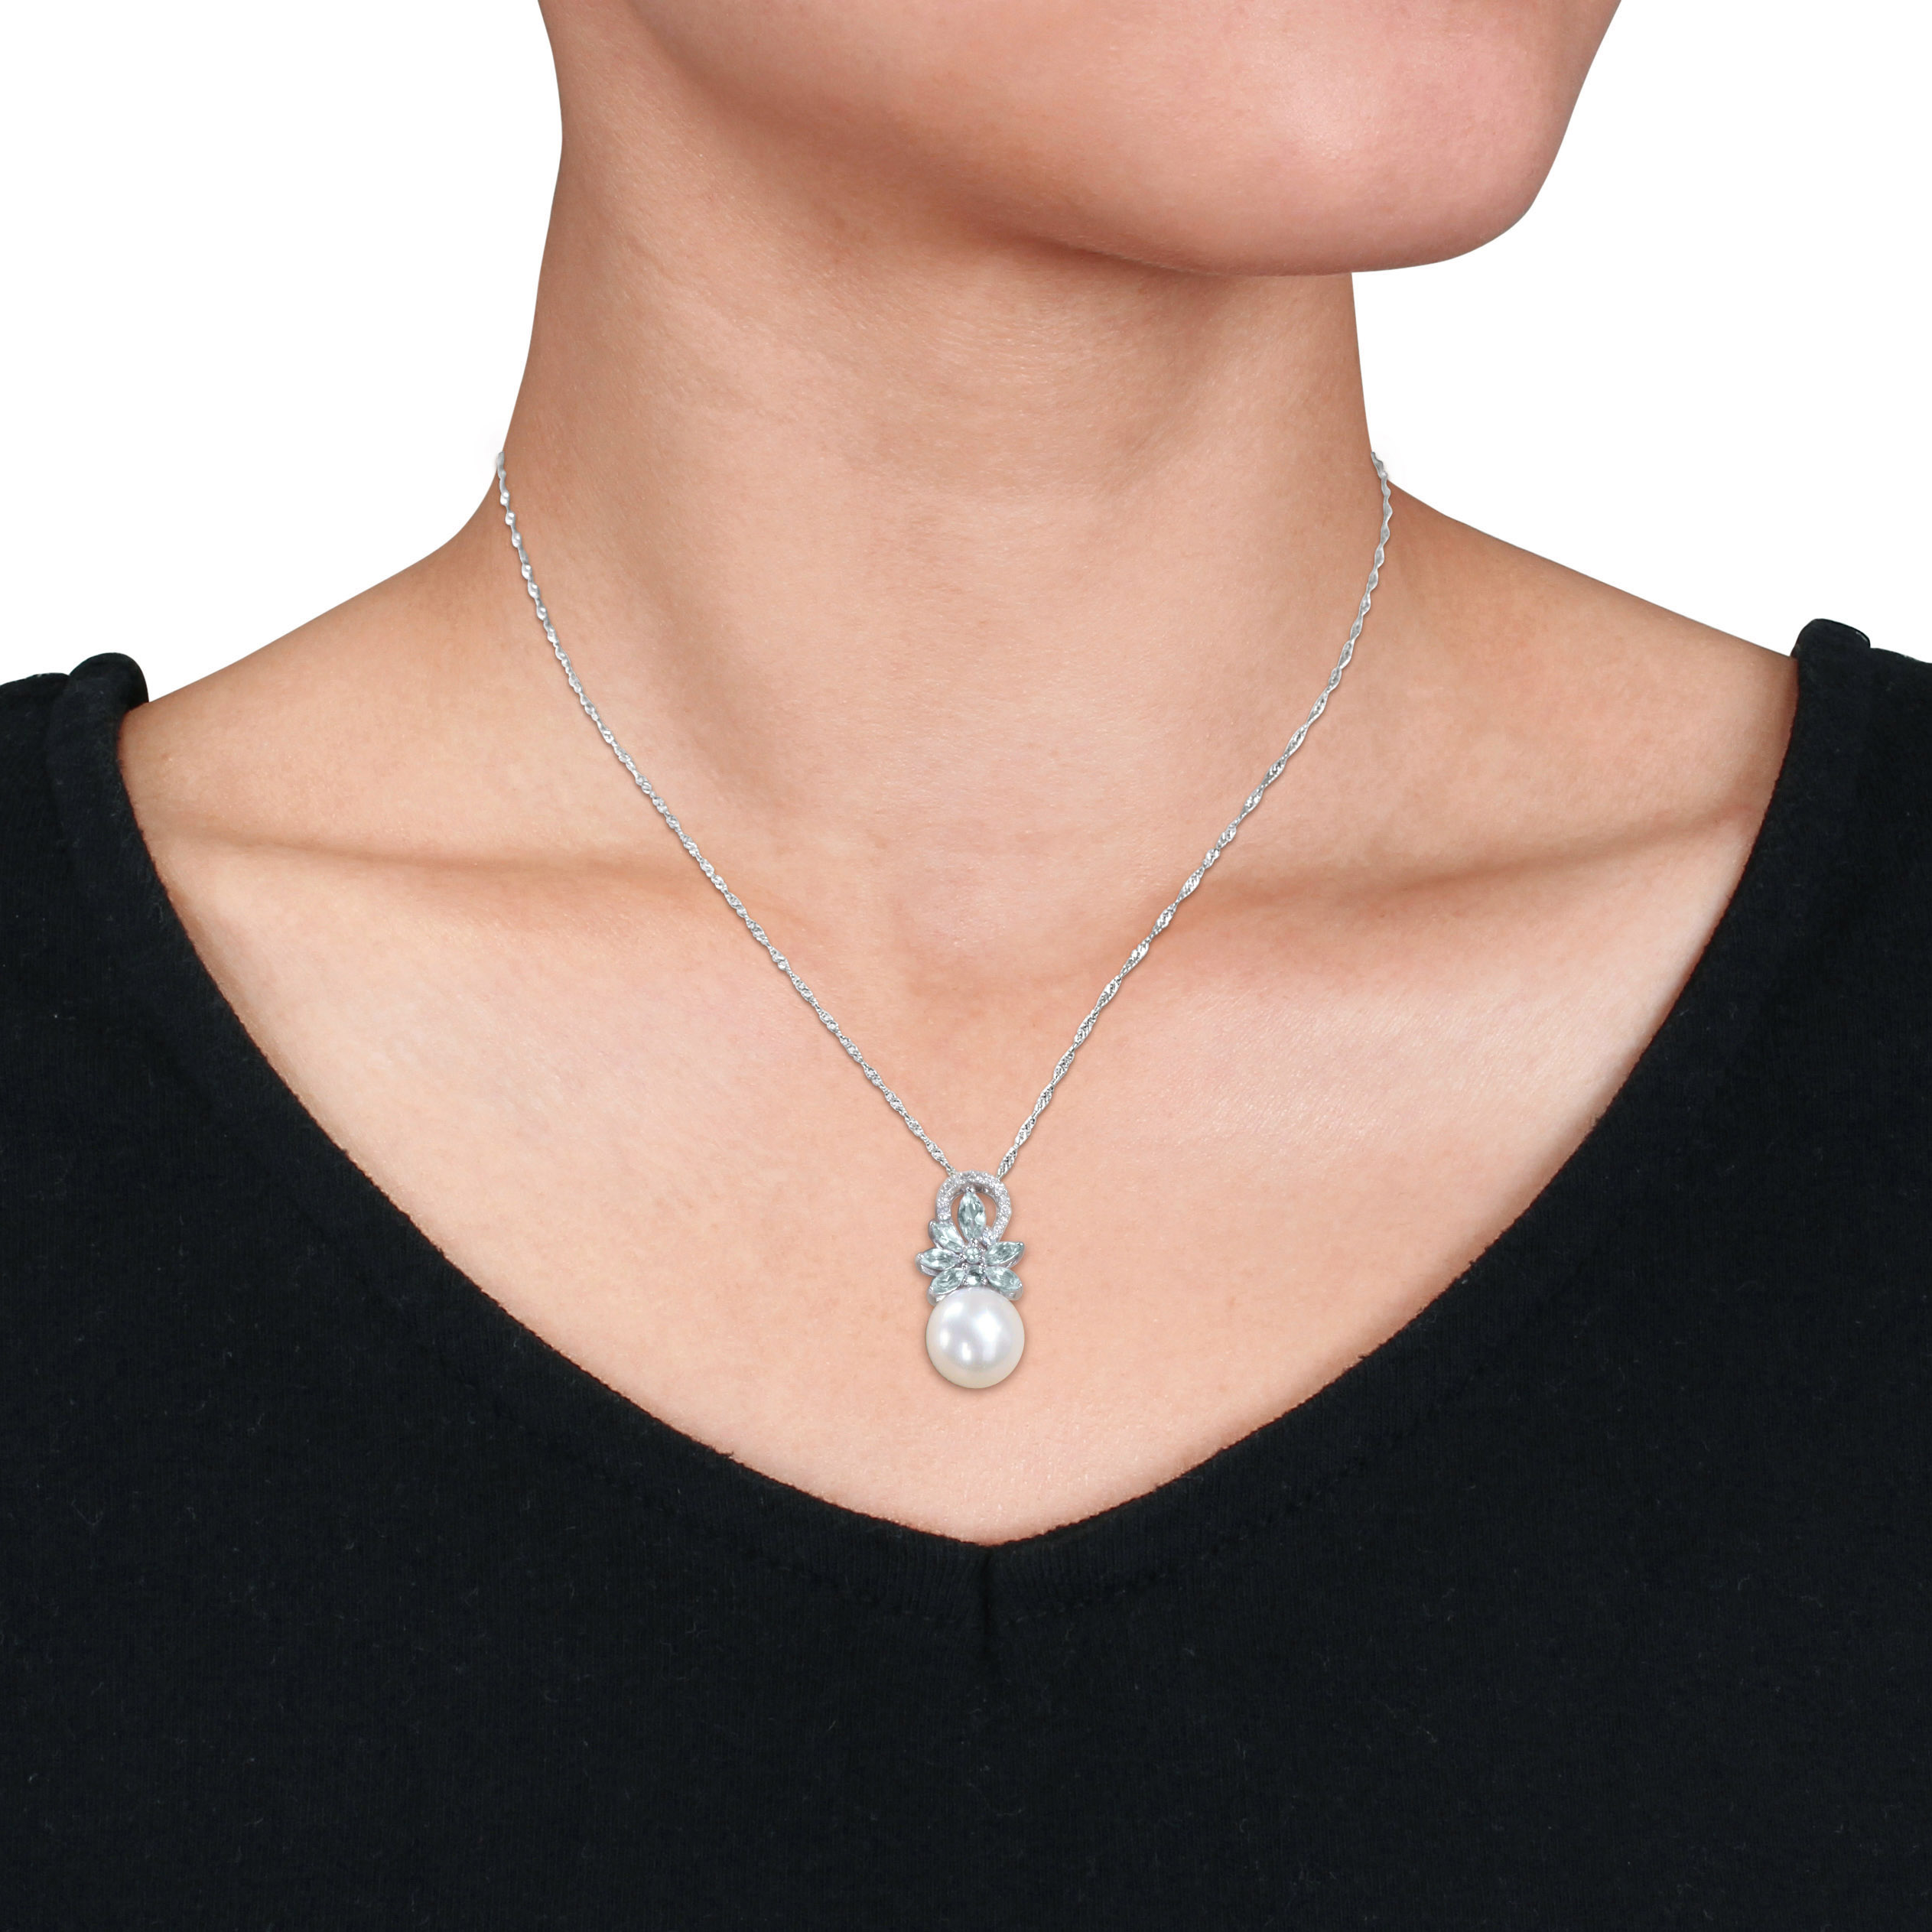 9.5-10 MM Cultured Freshwater Pearl and 1/3 CT TGW Aquamarine and Diamond Accent Flower Pendant with Chain in 14k White Gold - 17 in.